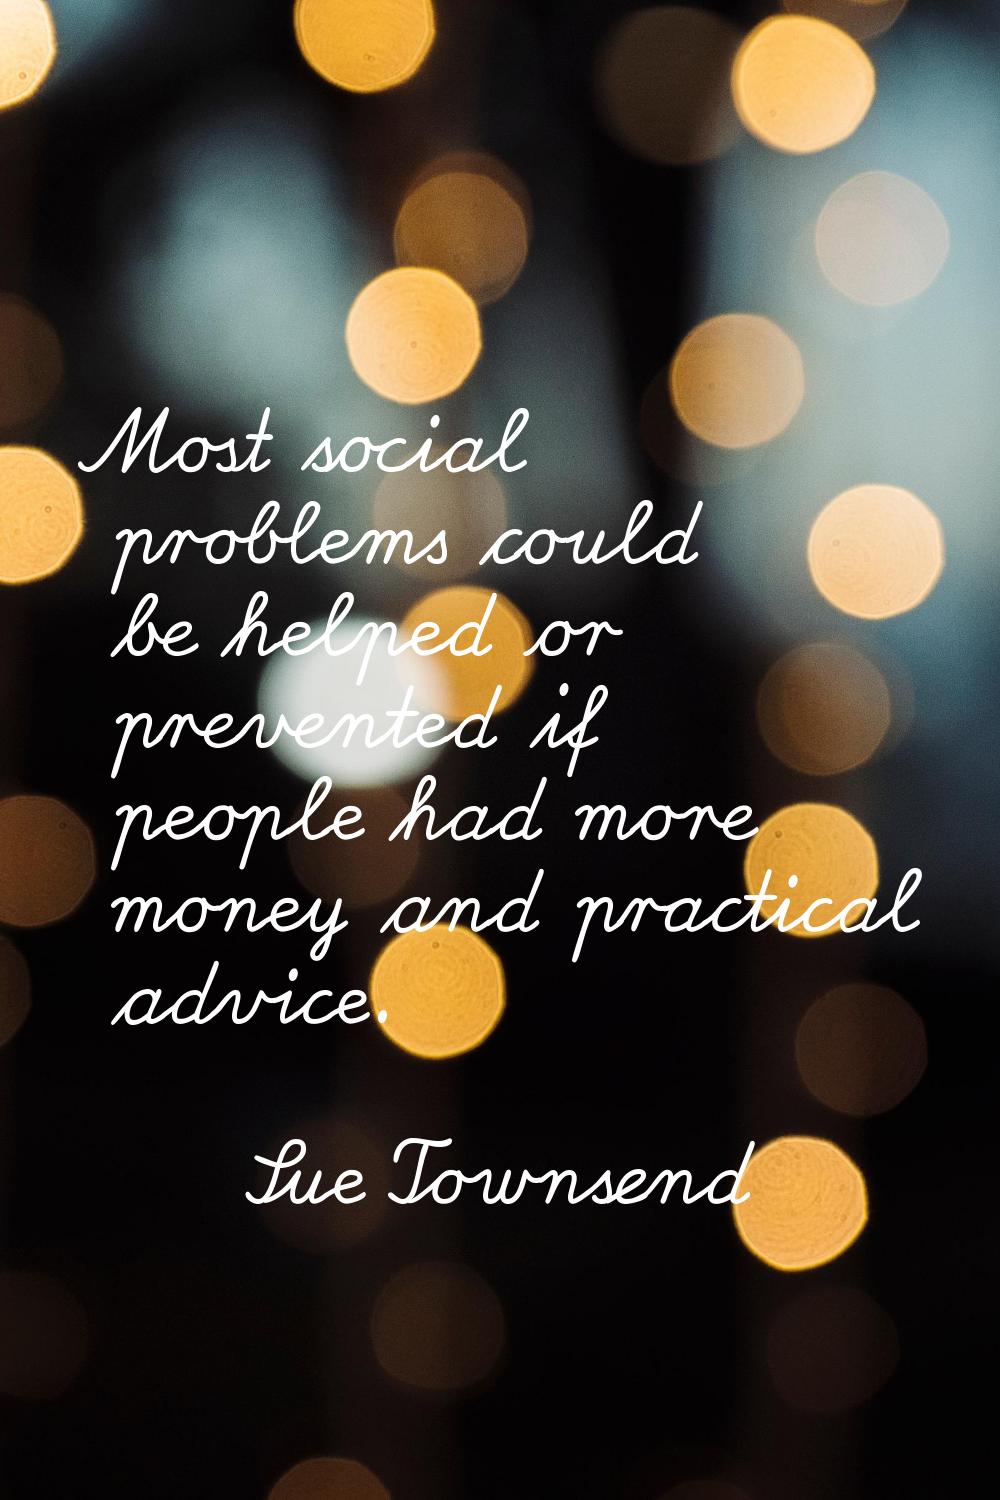 Most social problems could be helped or prevented if people had more money and practical advice.